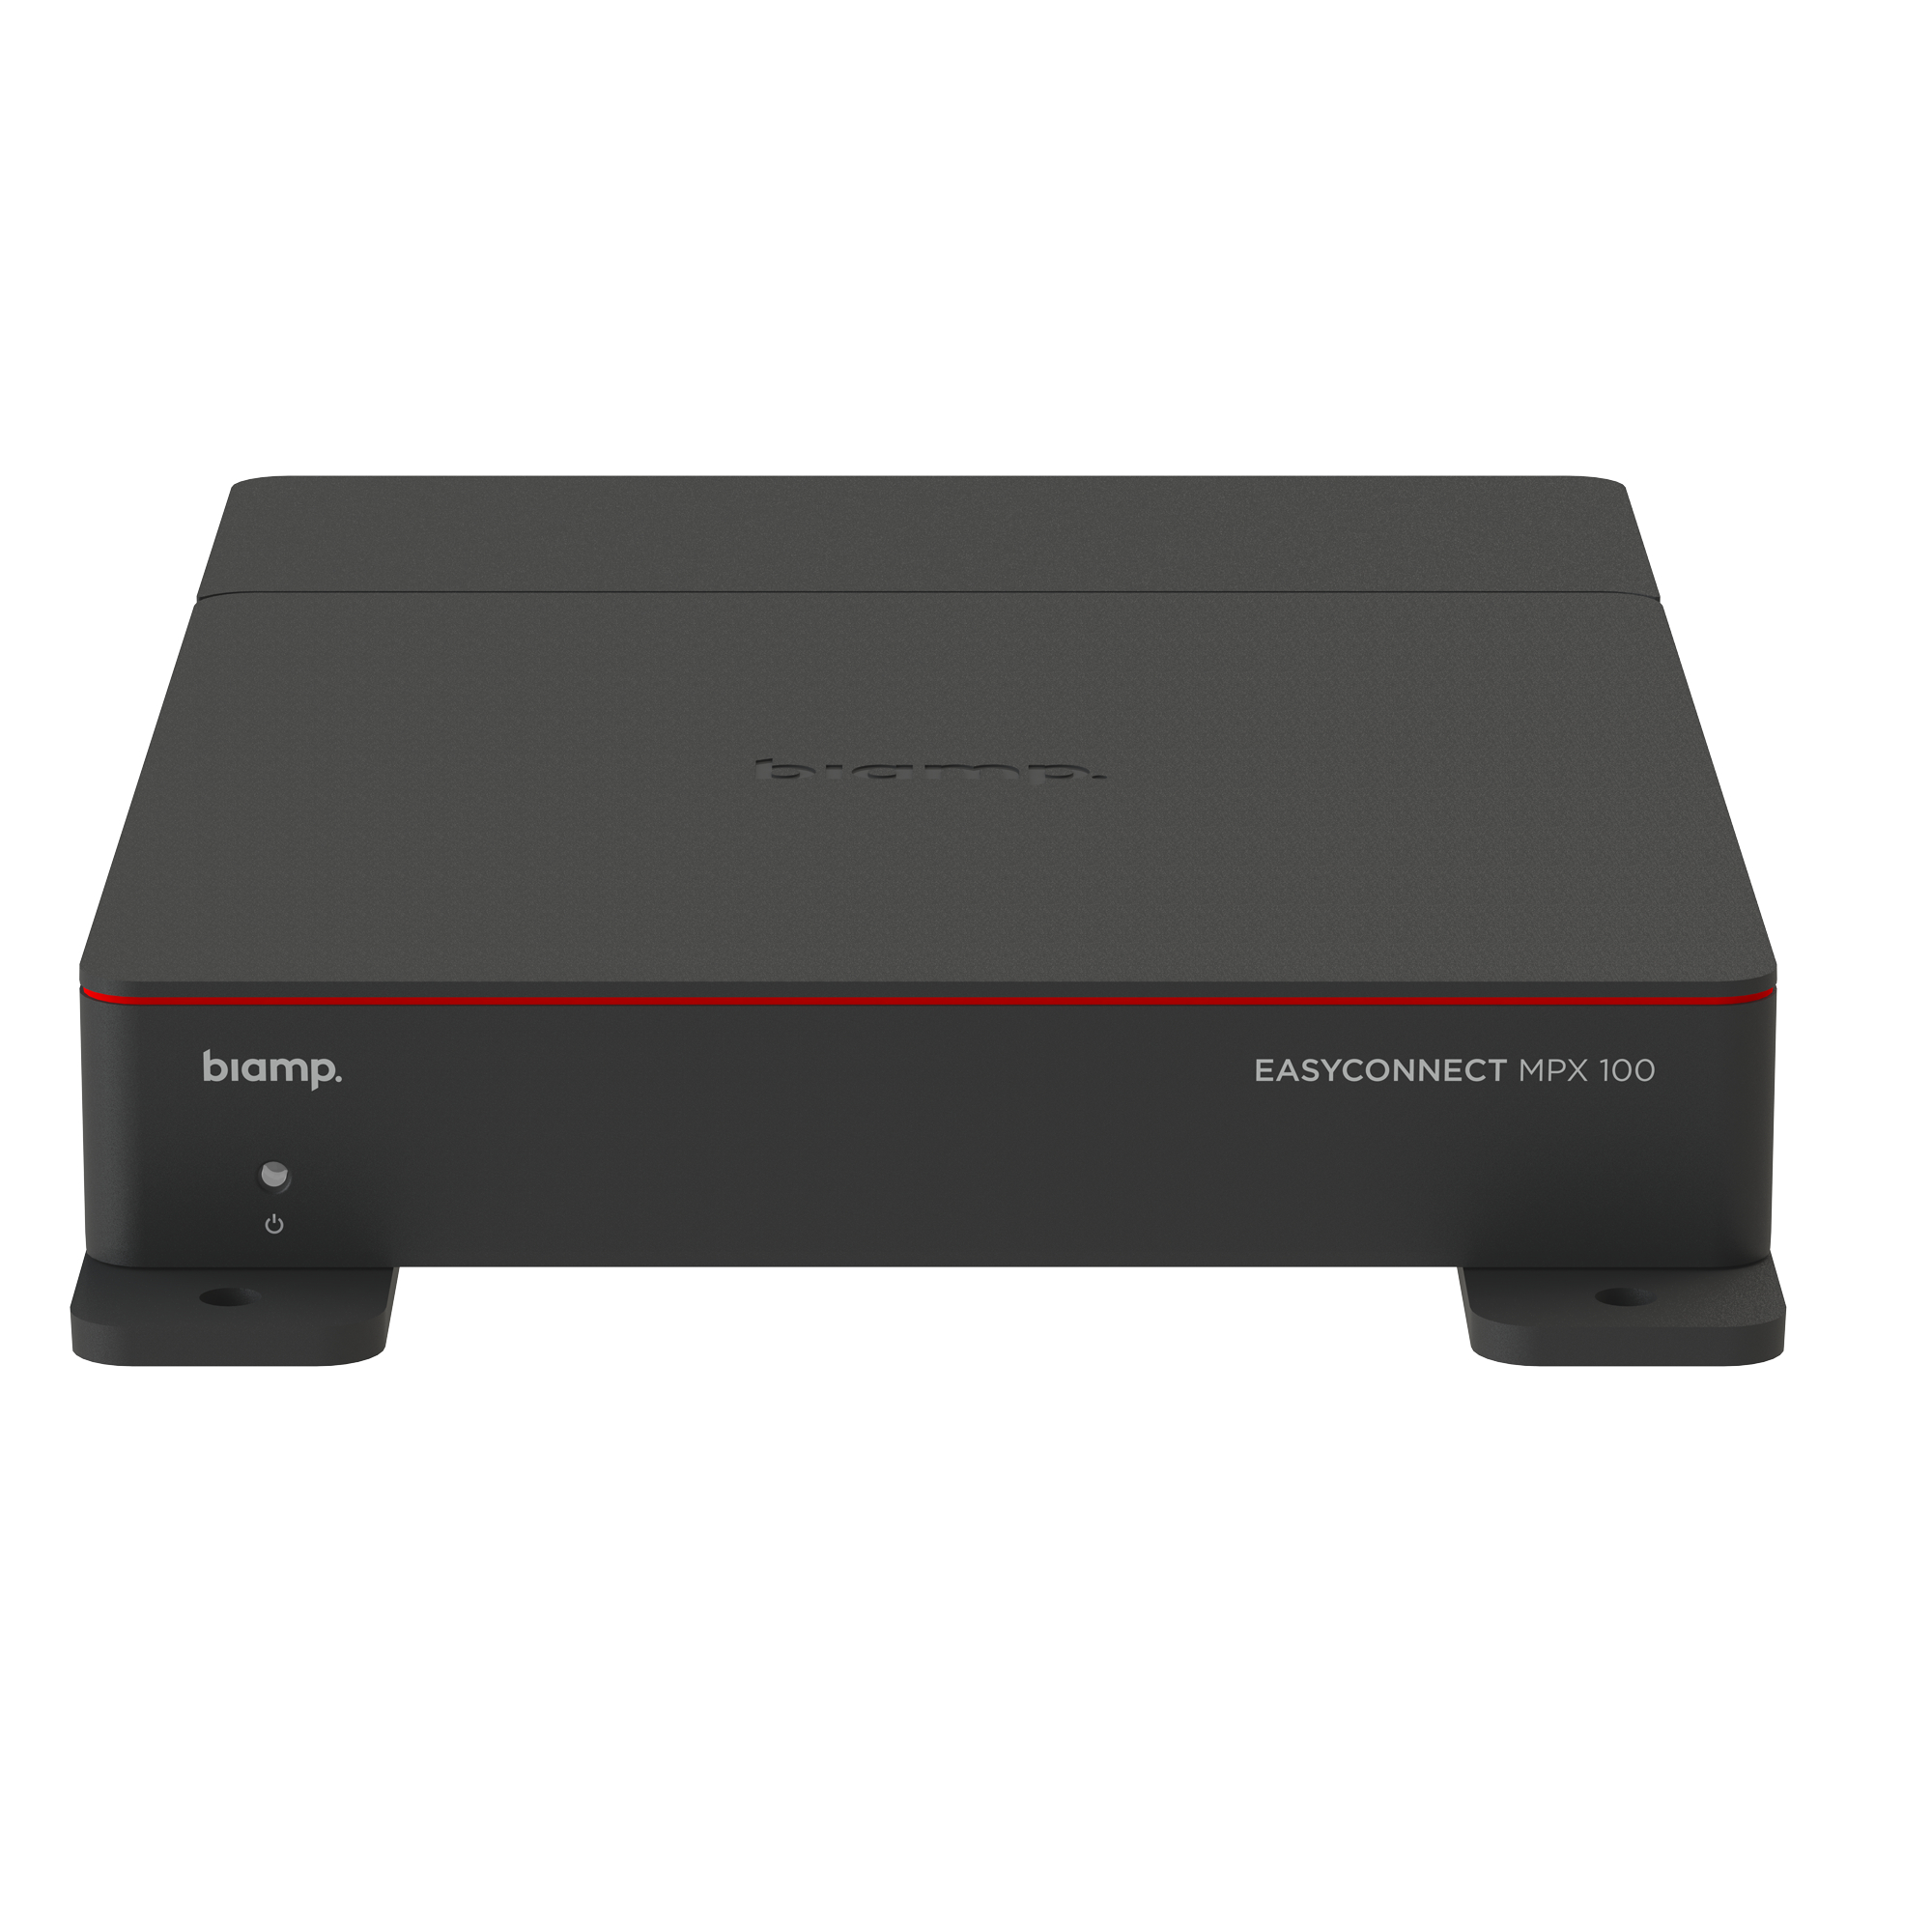 Biamp EasyConnect MPX 100